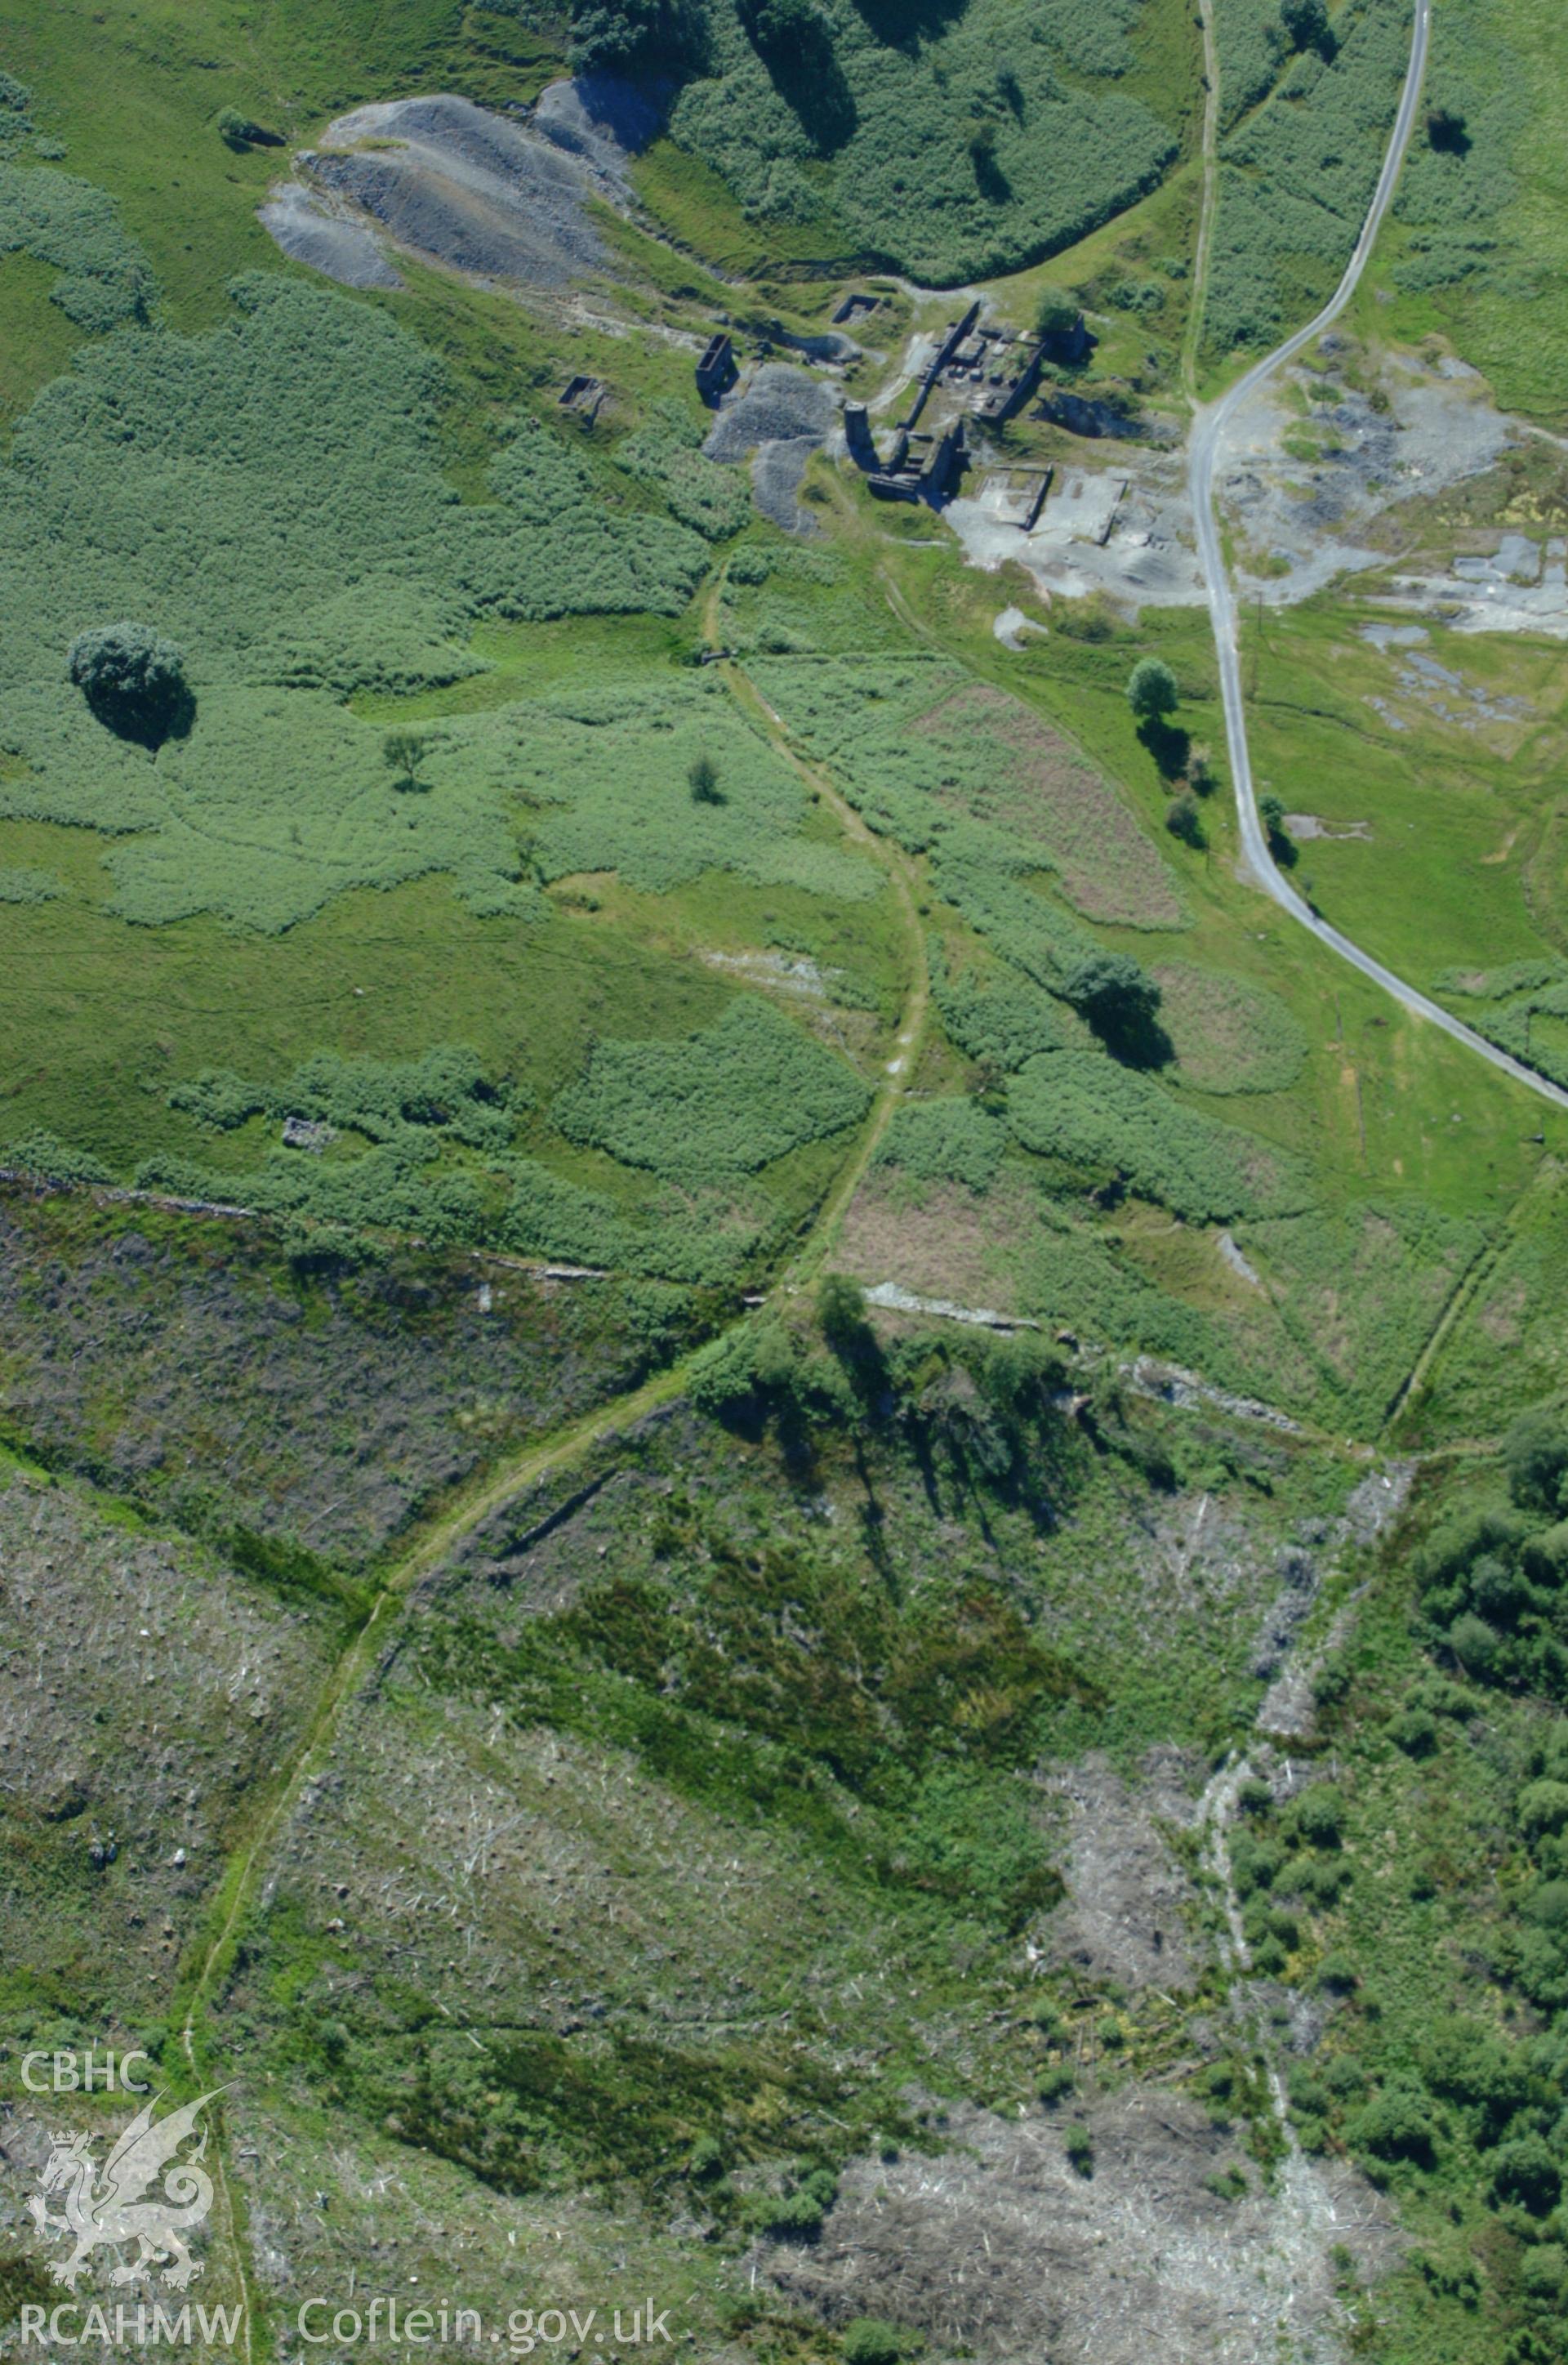 RCAHMW colour oblique aerial photograph of Bwlchglas mine, east of Talybont taken on 14/06/2004 by Toby Driver